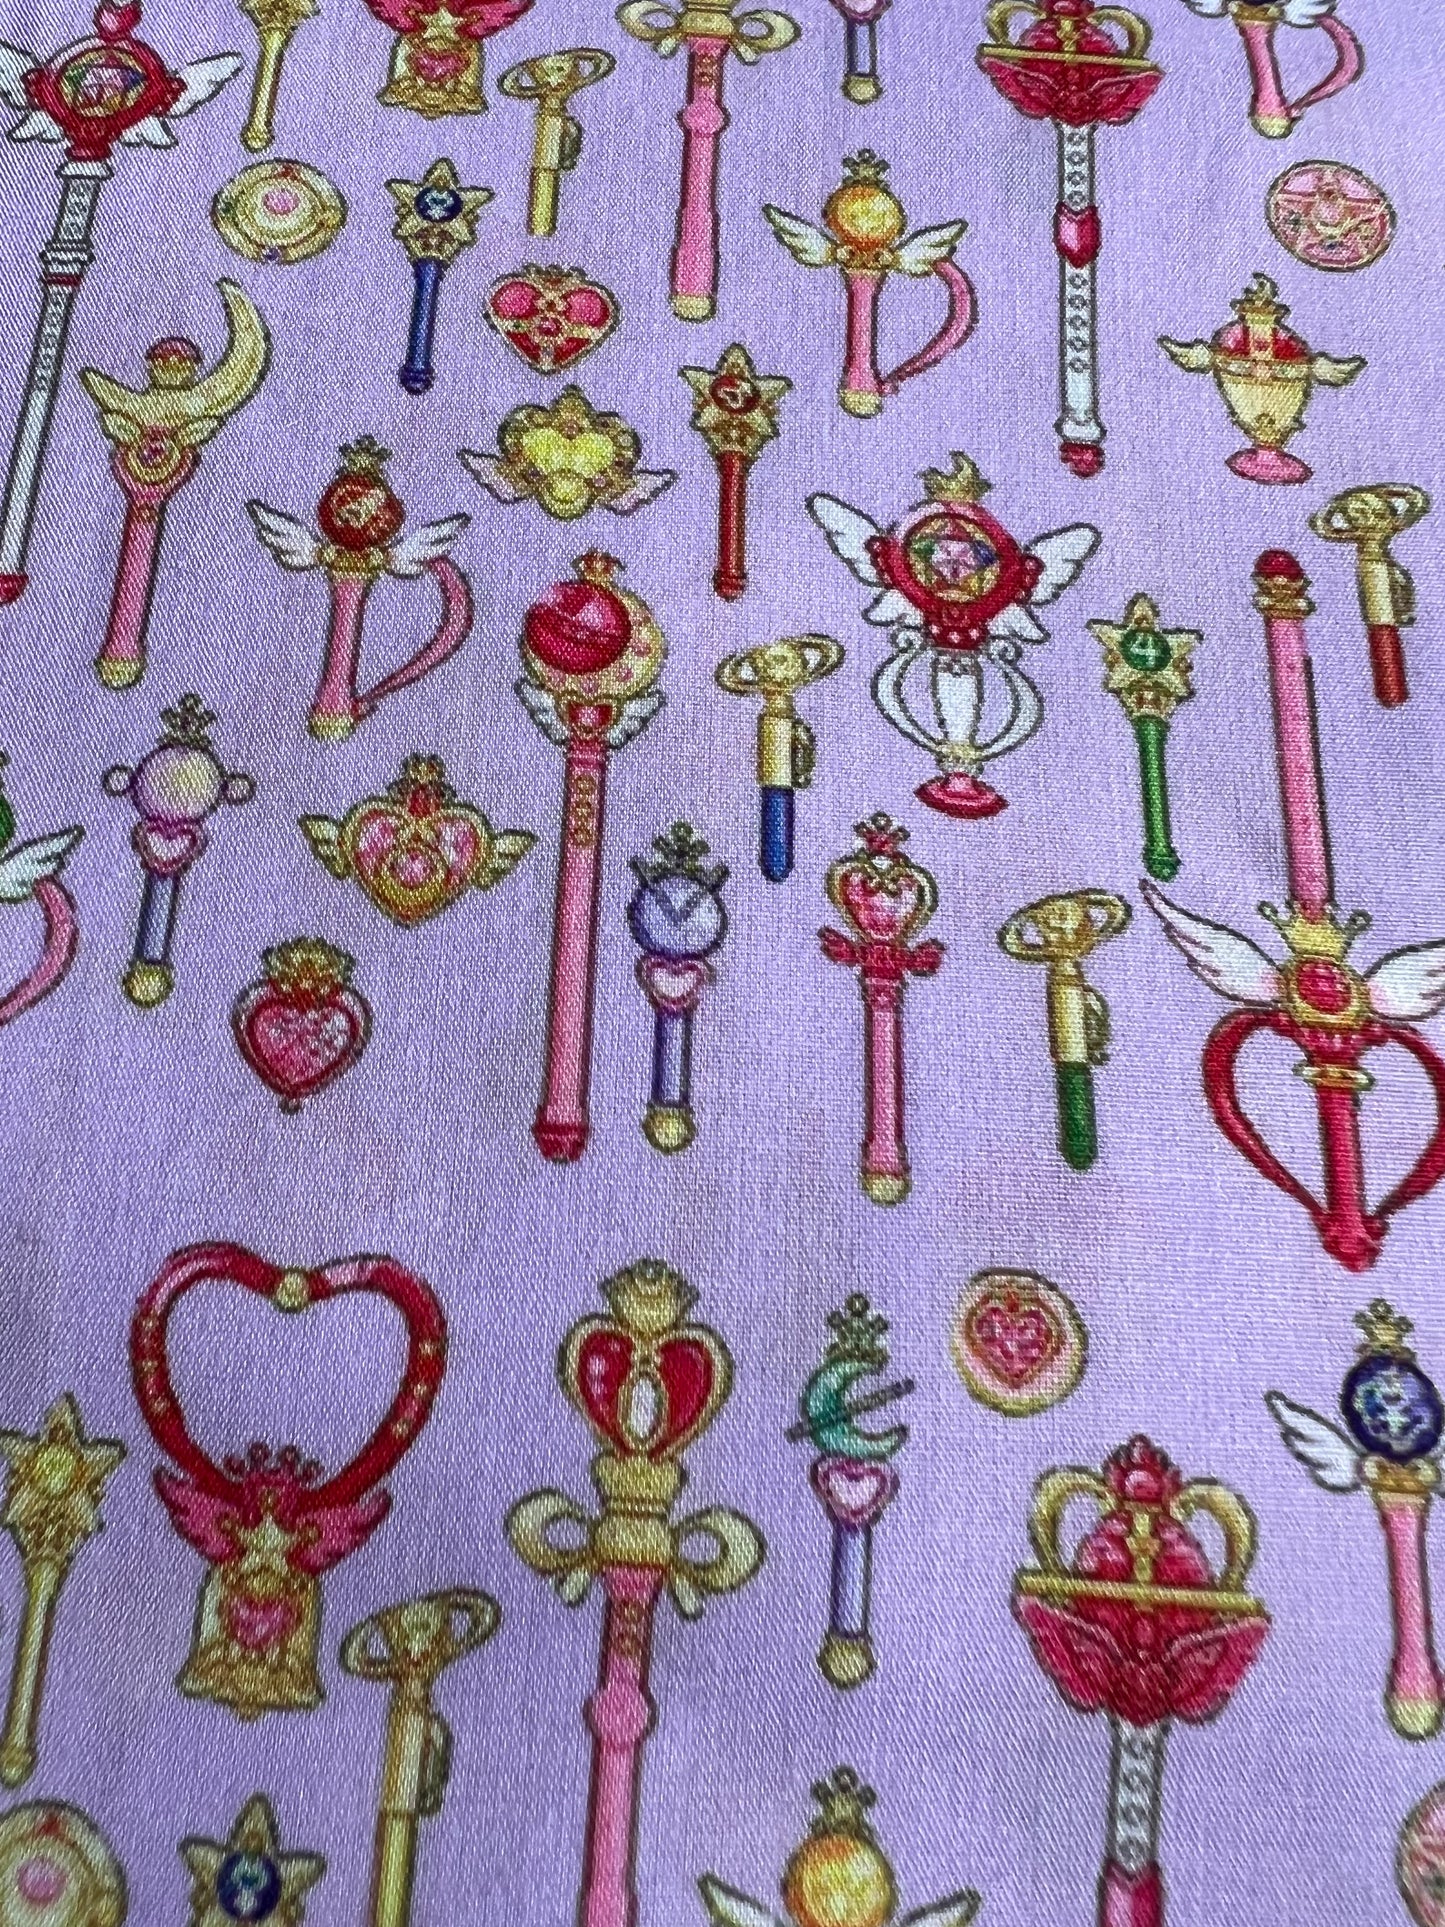 MOON PRISM POWER - Polycotton Fabric from Japan